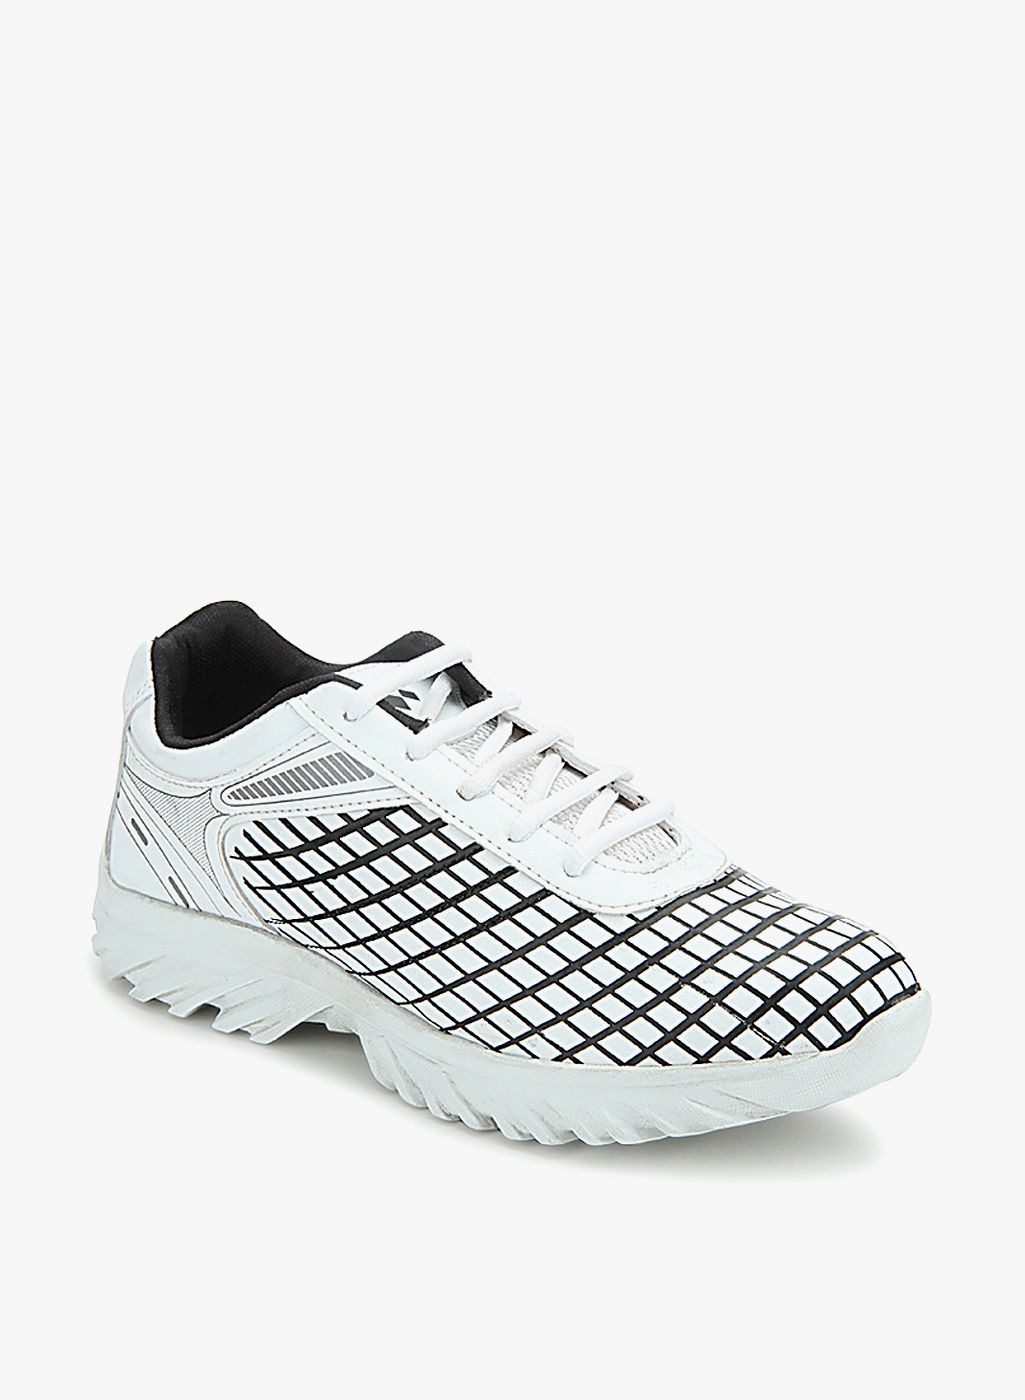 499 sports shoes